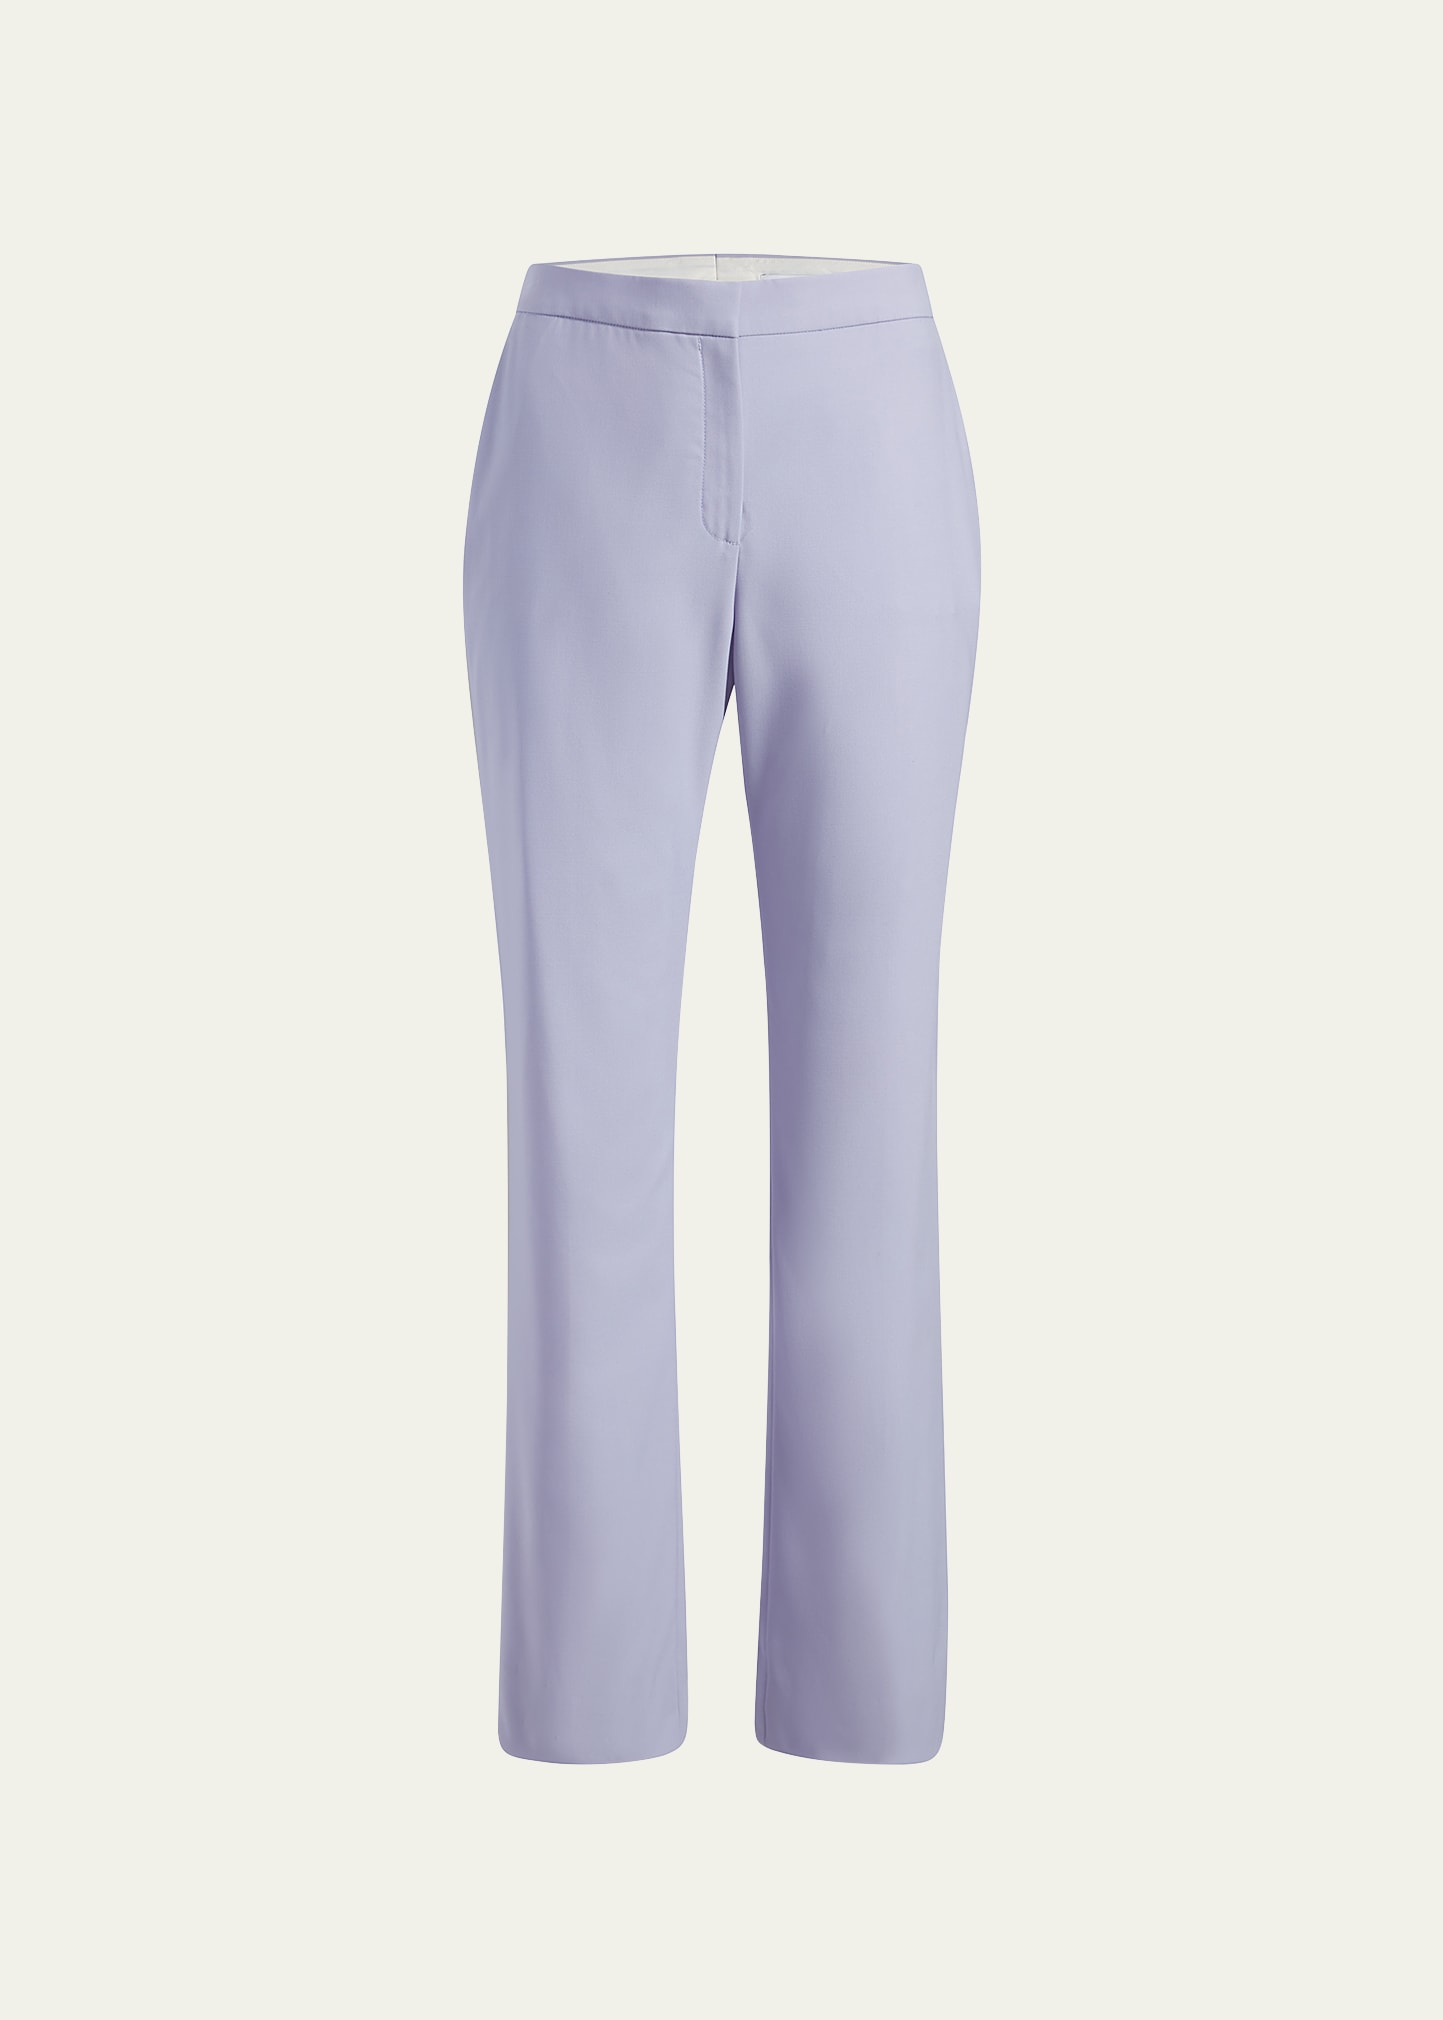 Another Tomorrow Classic Trouser In Lilac